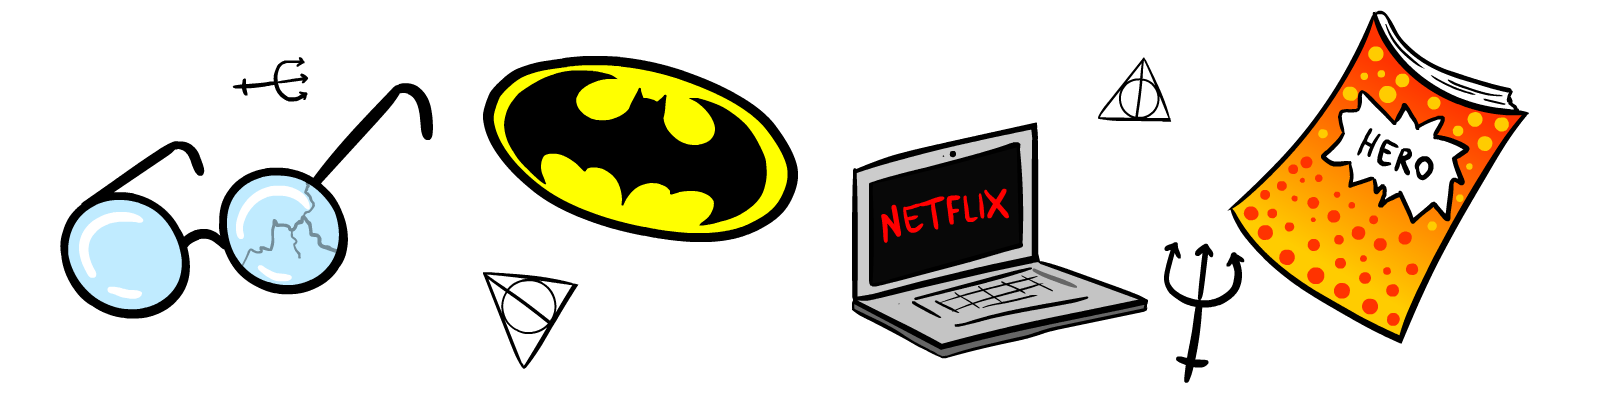 some nerdy things, like Harry Potter's glasses, Batman's symbol, a computer with Netflix, and a comic book